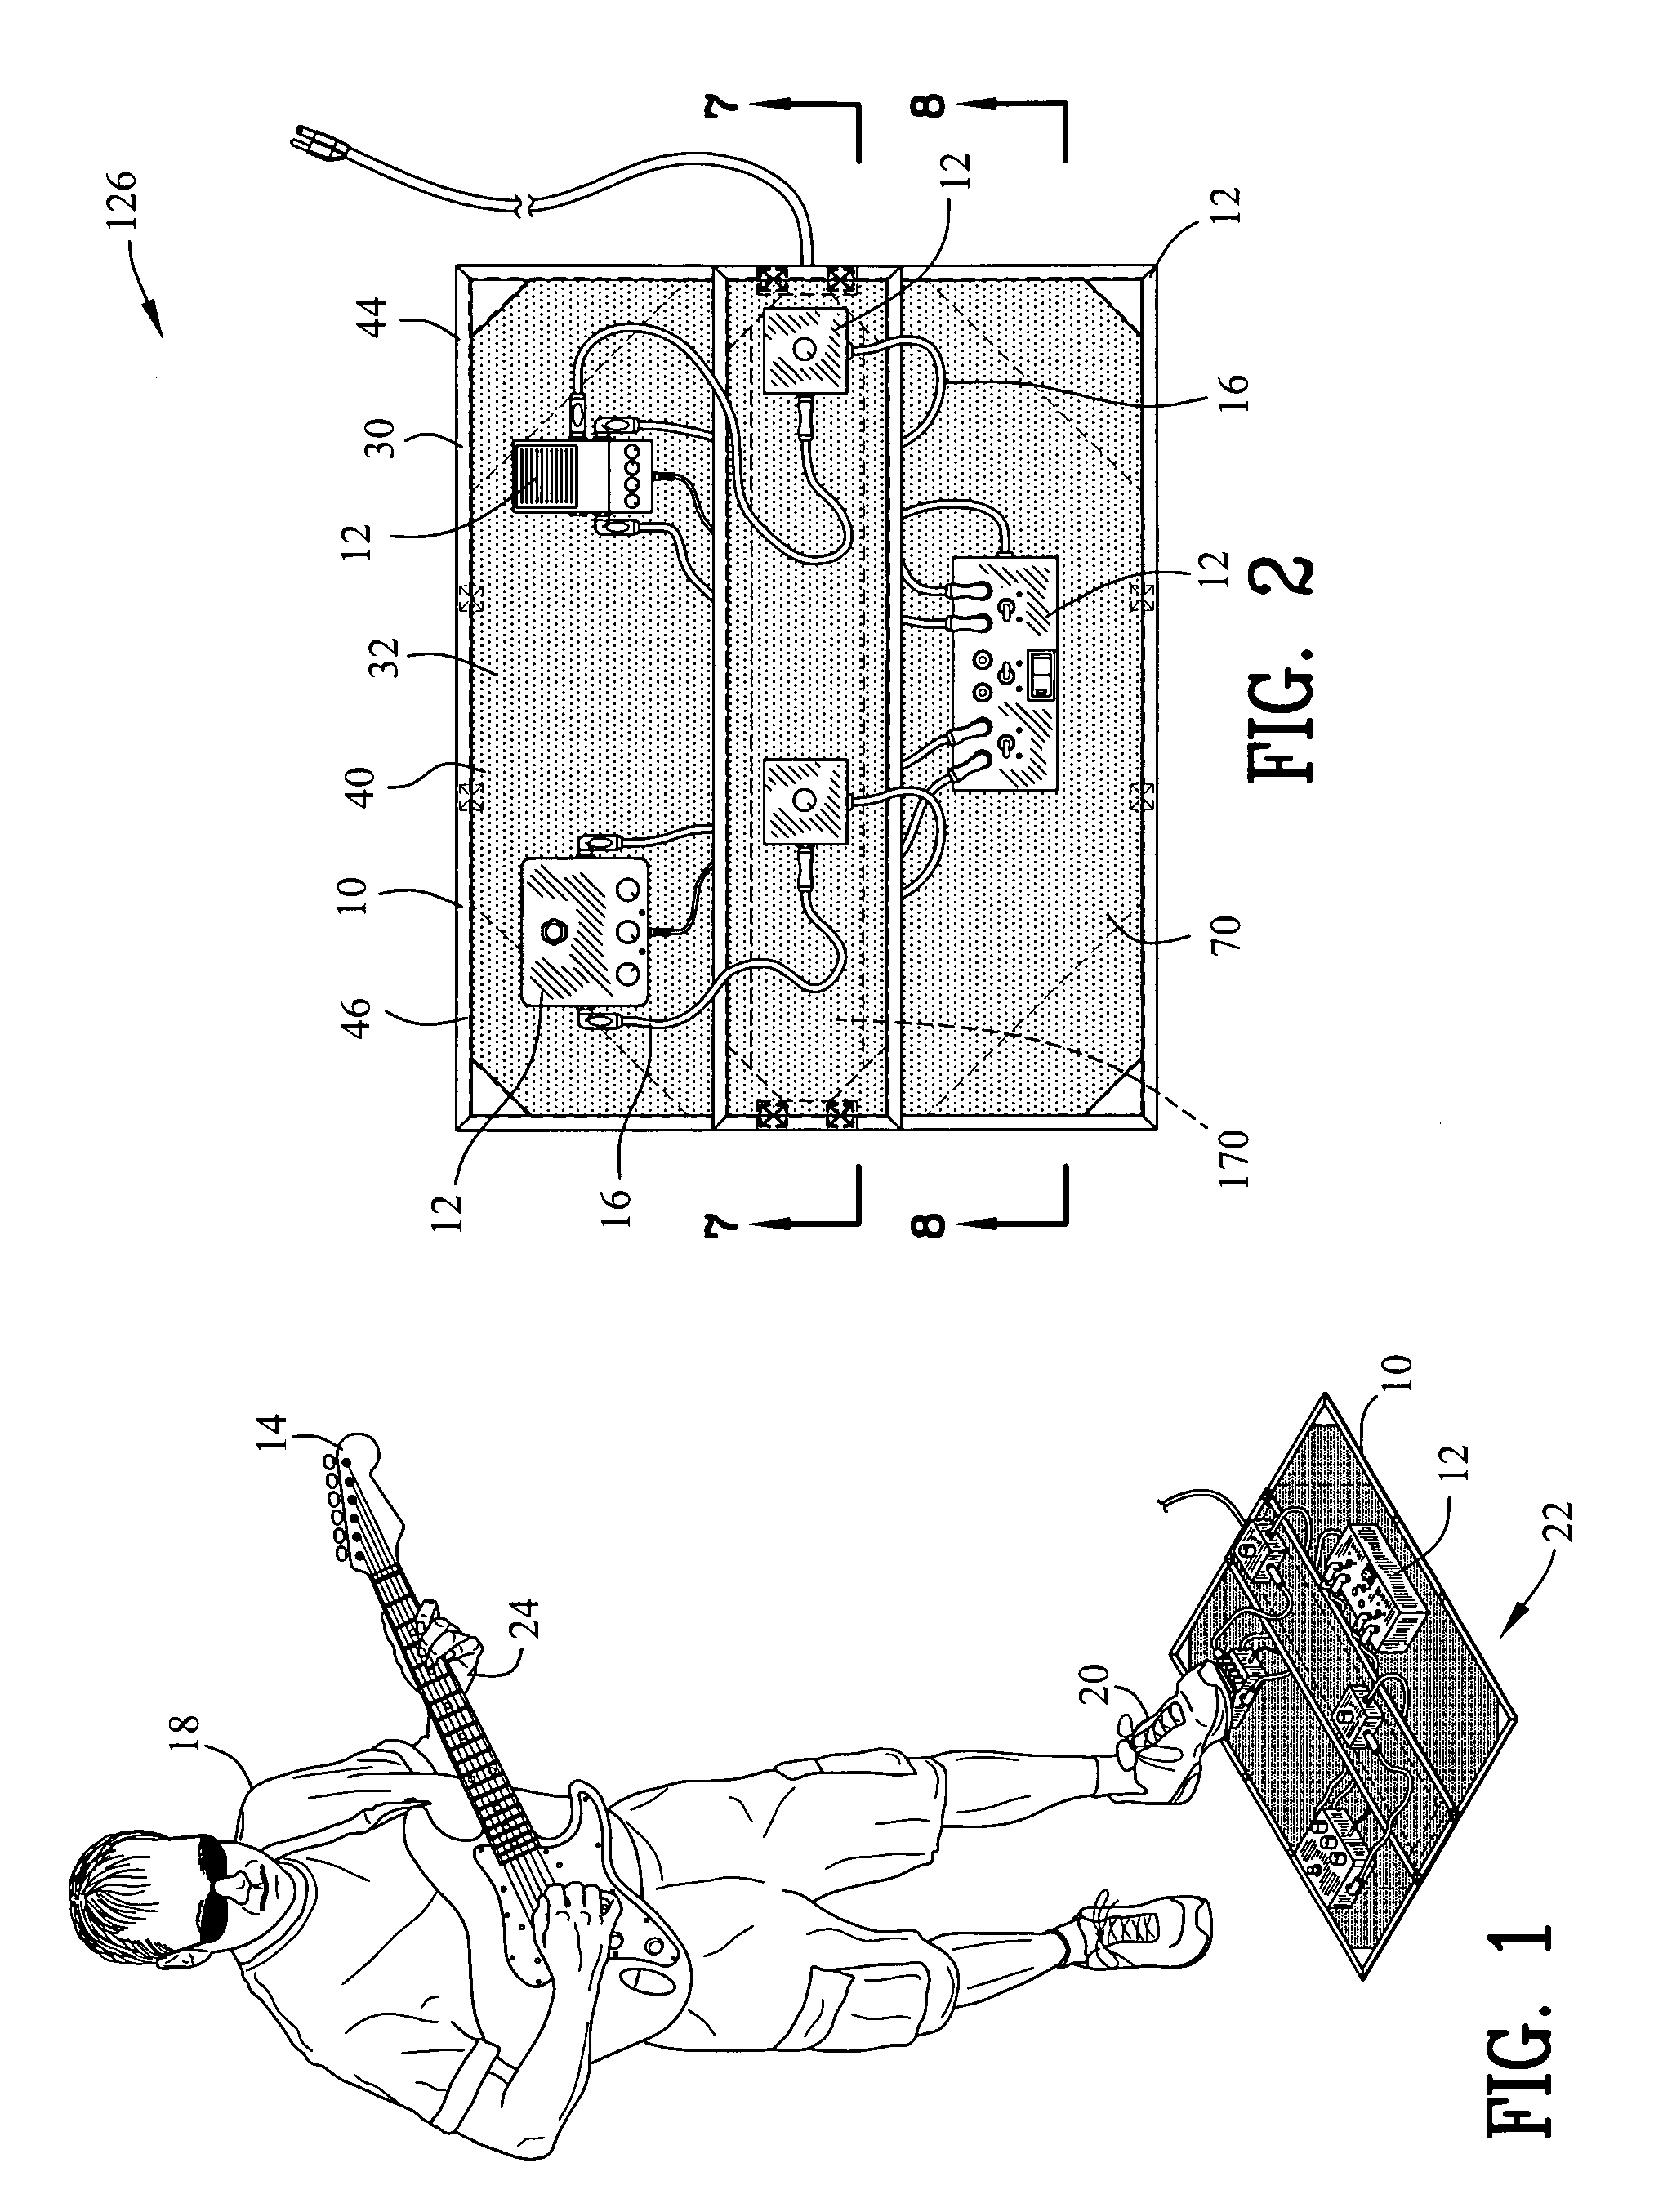 Mat and carrier for an object